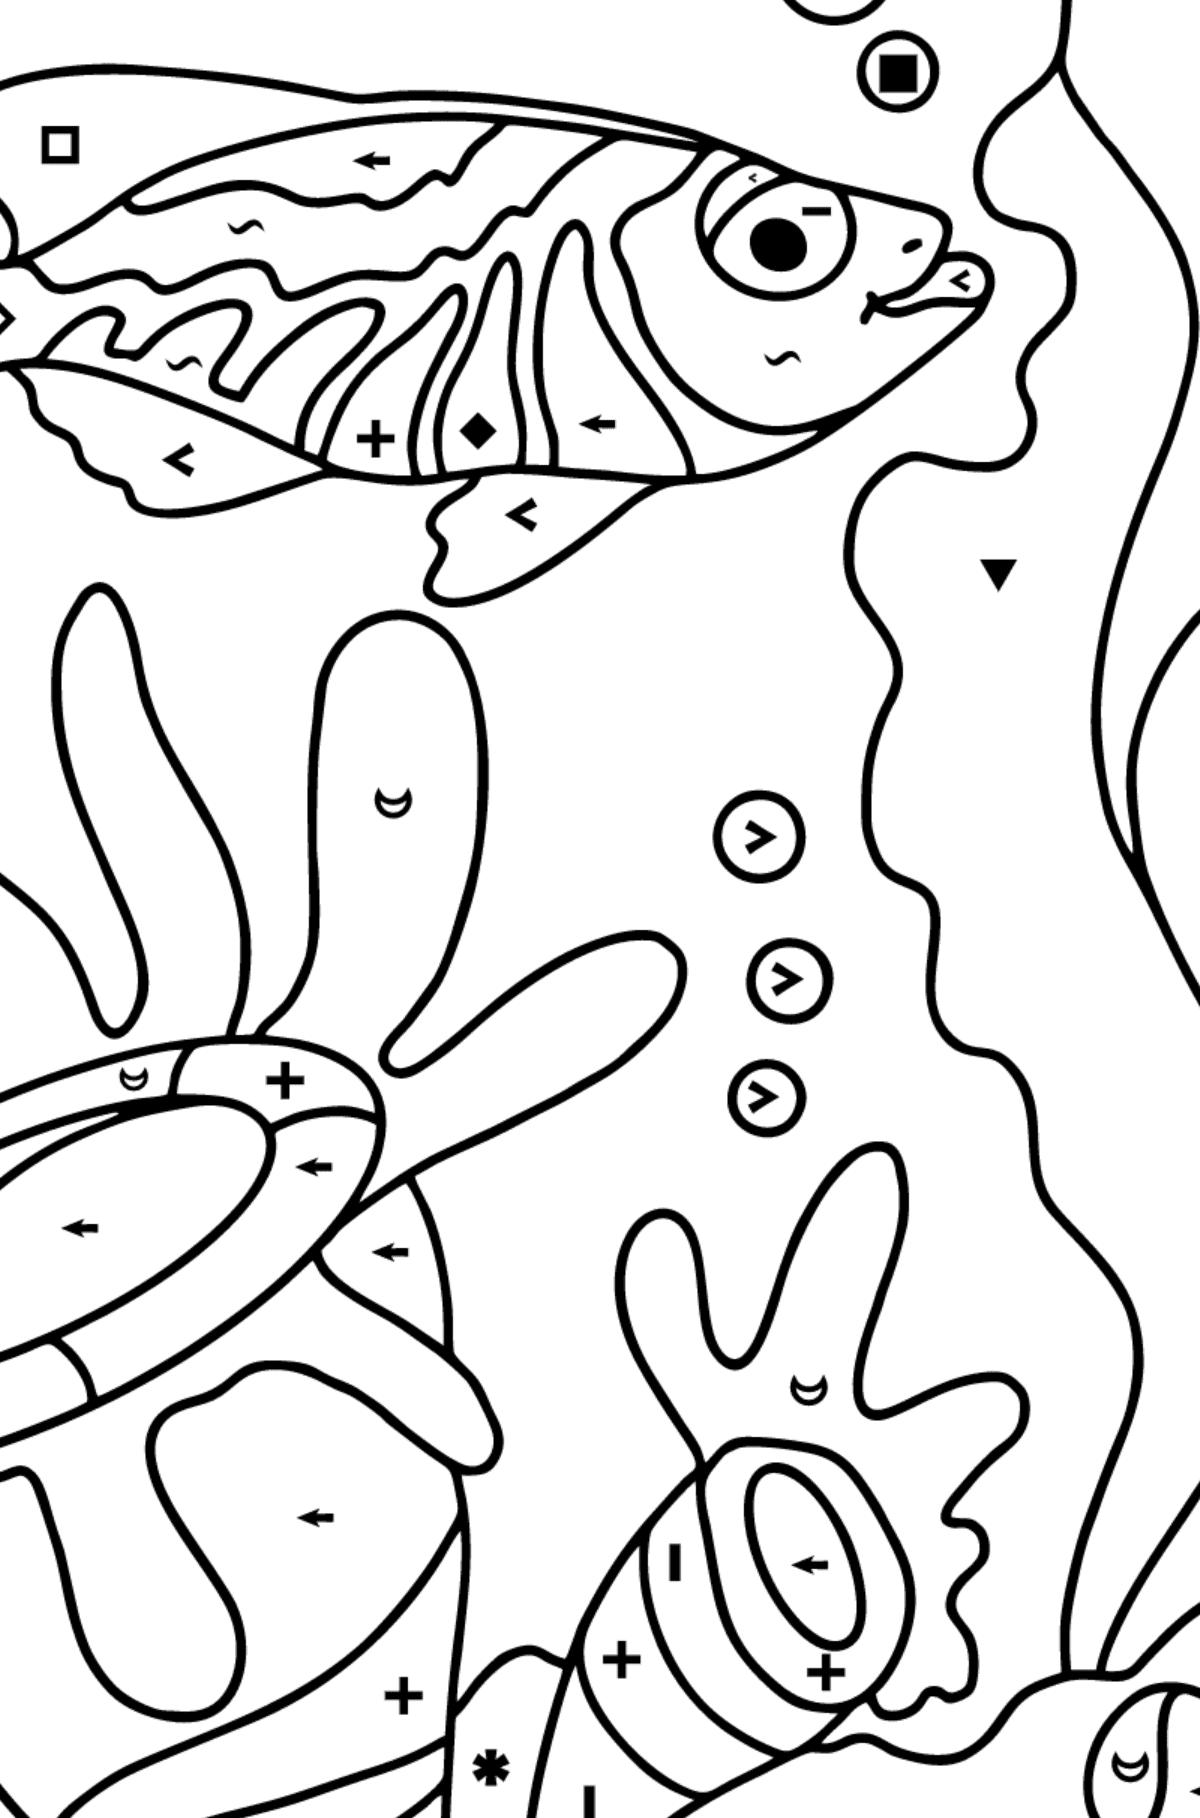 Coloring Page - A Fish is Swimming - Coloring by Symbols for Kids